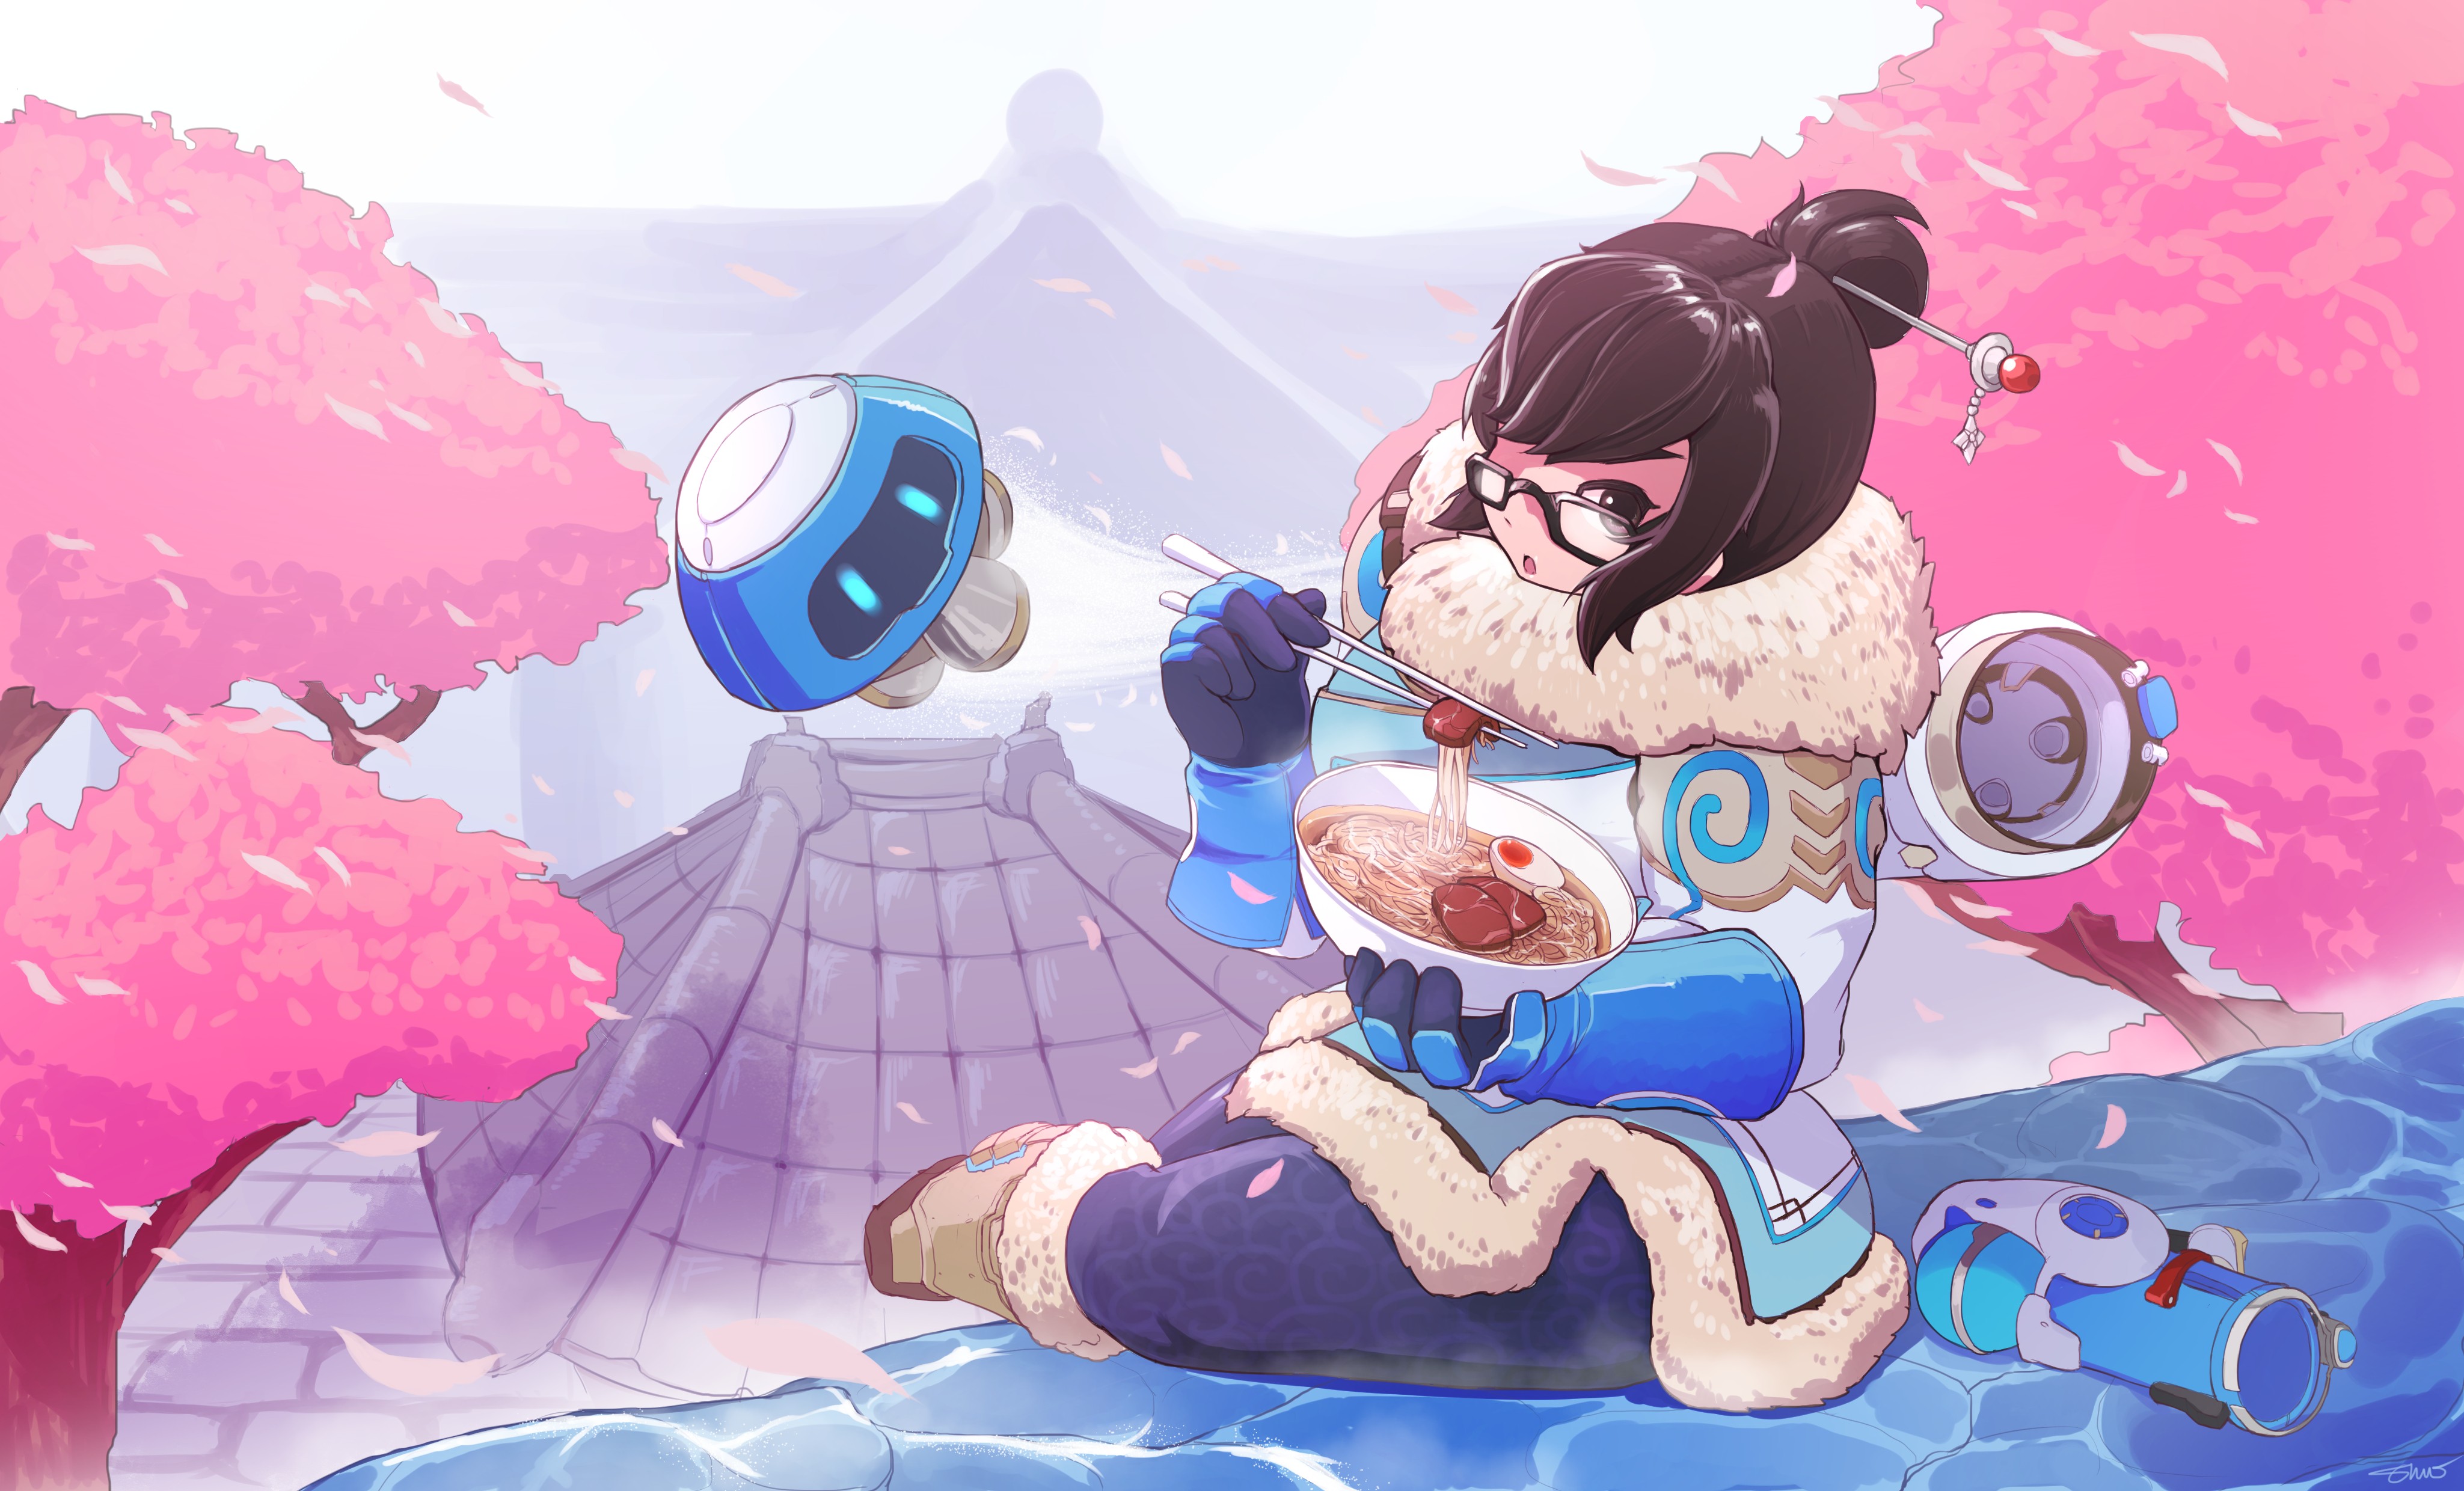 General 4098x2480 Blizzard Entertainment Overwatch Mei (Overwatch) video game characters food eating video game girls brunette PC gaming video game art women with glasses